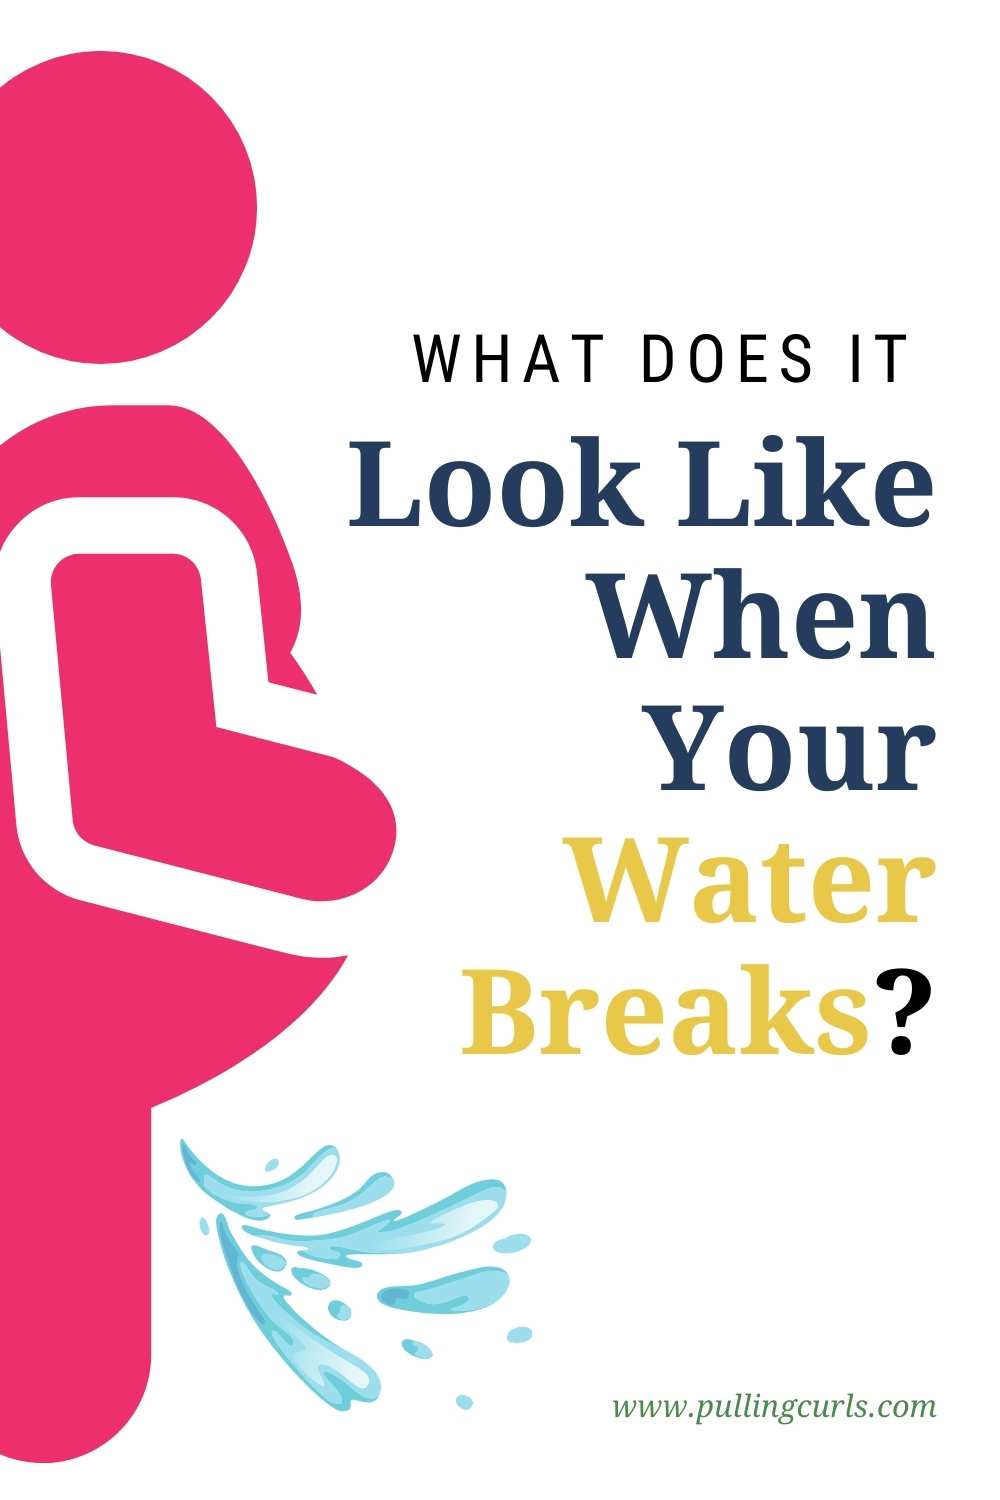 pregnant icon with water splashing out of her crotch / what does it look like when your water breaks? via @pullingcurls